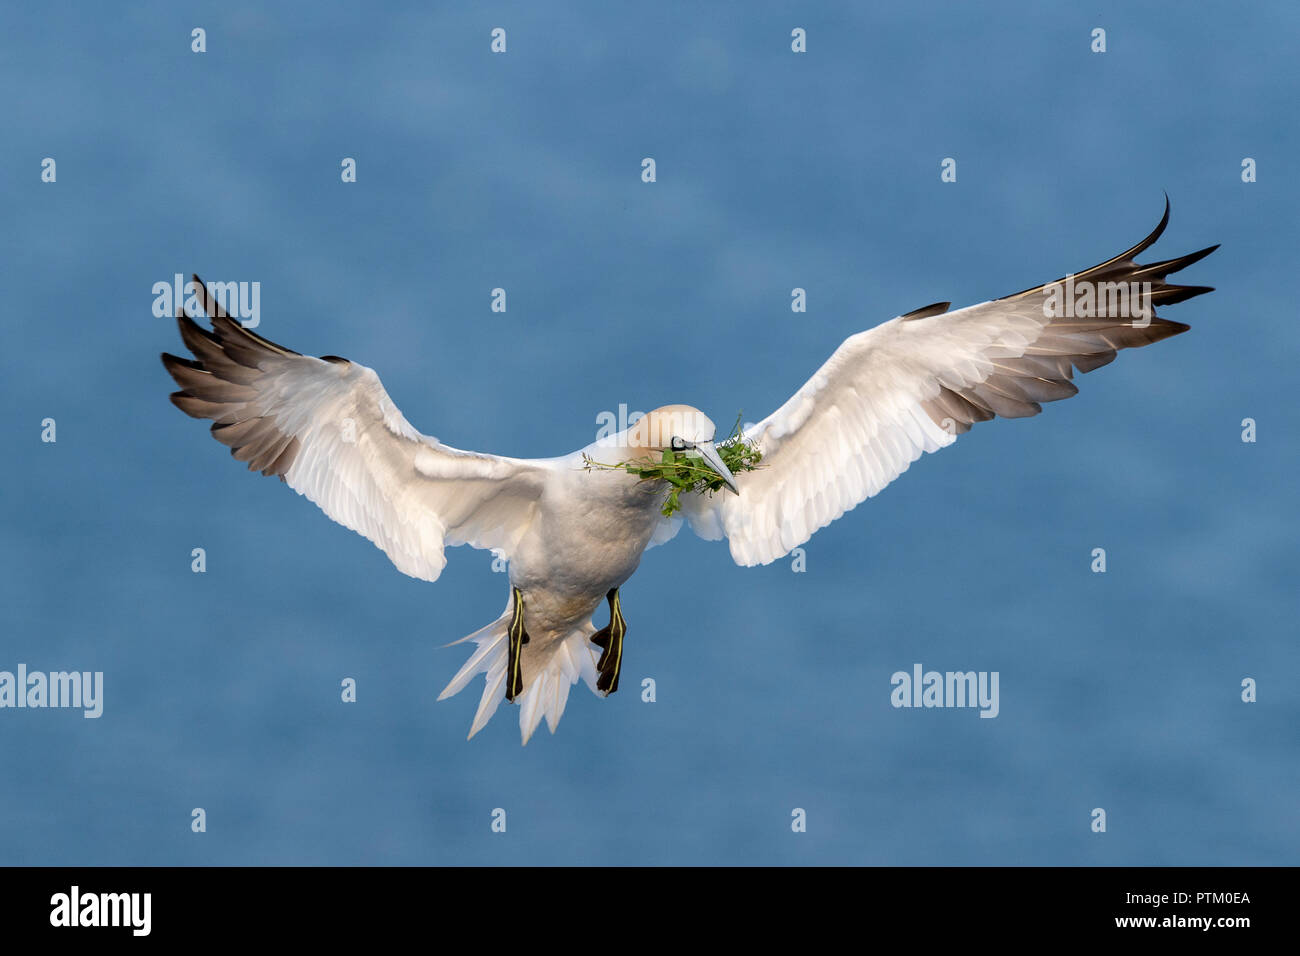 Northern Gannet (Morus bassanus) with nesting material, approaching, Heligoland, Schleswig-Holstein, Germany Stock Photo